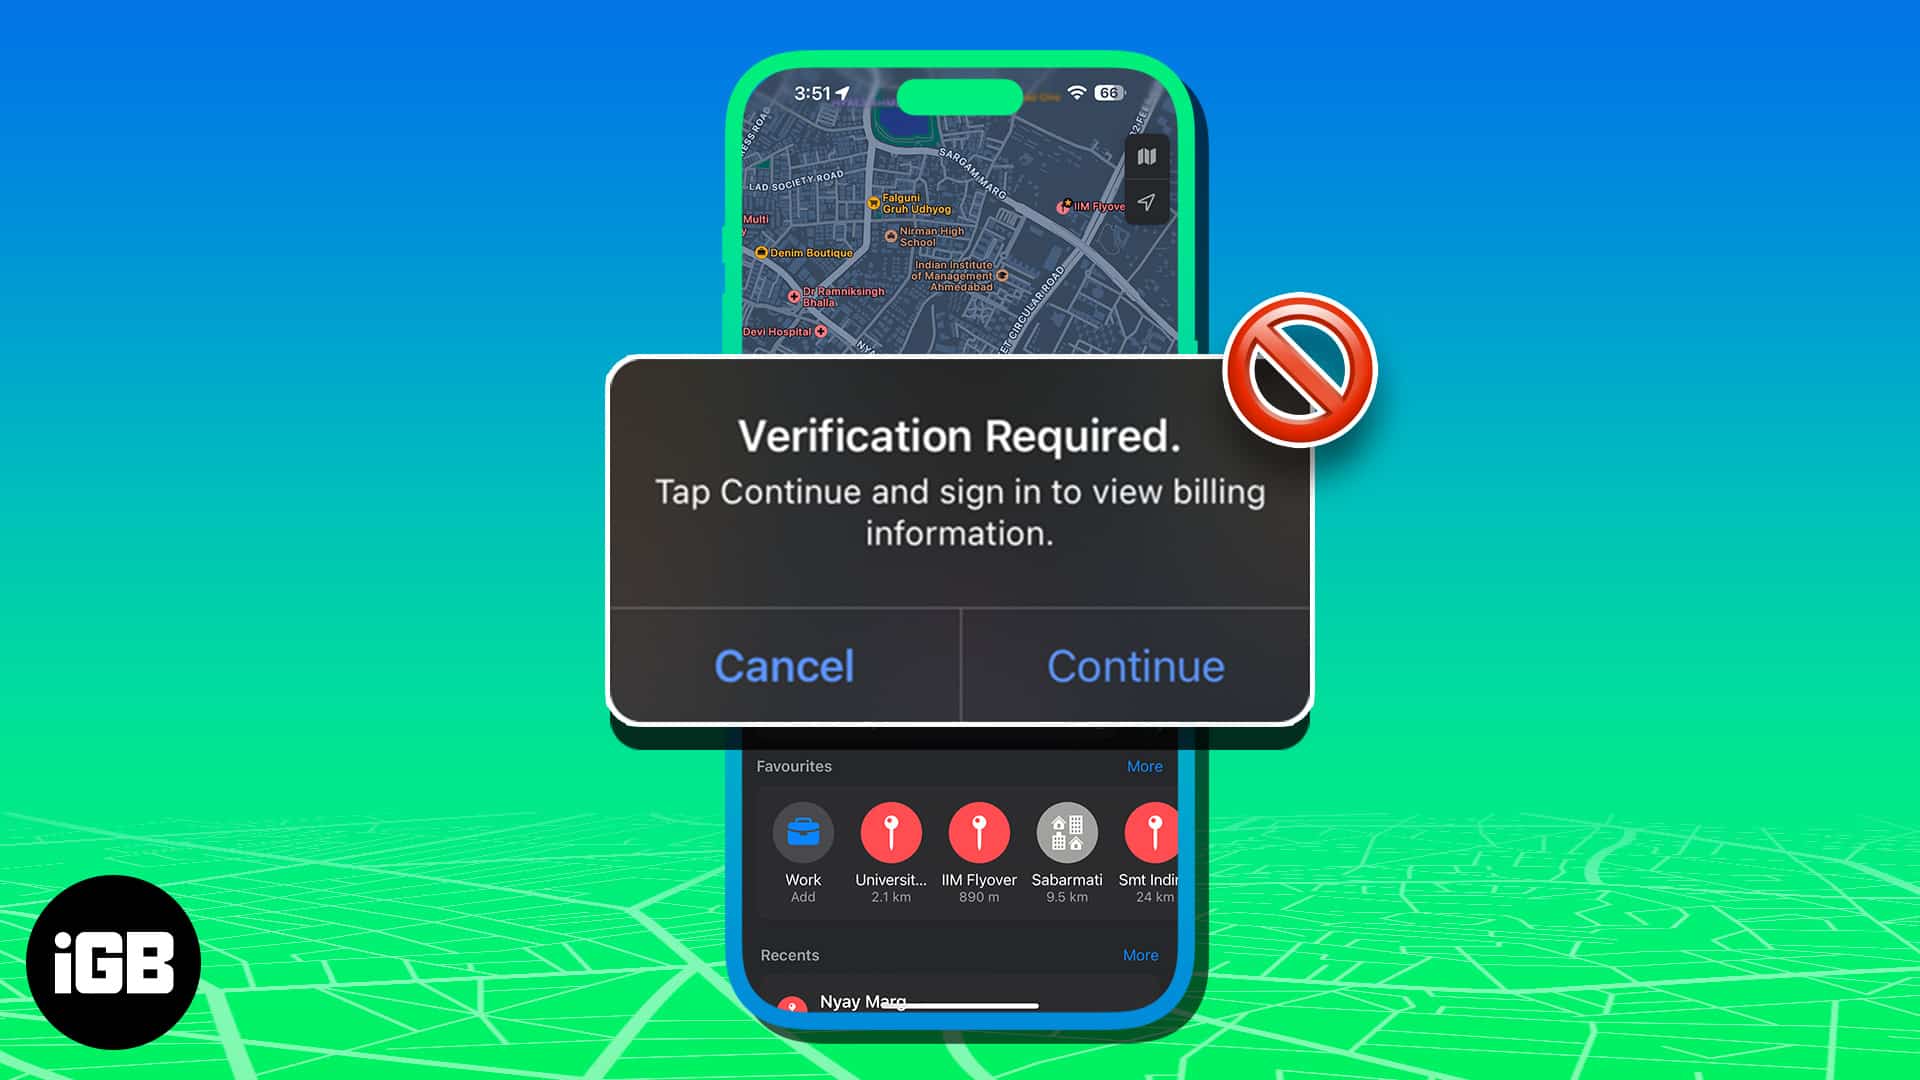 How to stop verification required for free ios app downloads